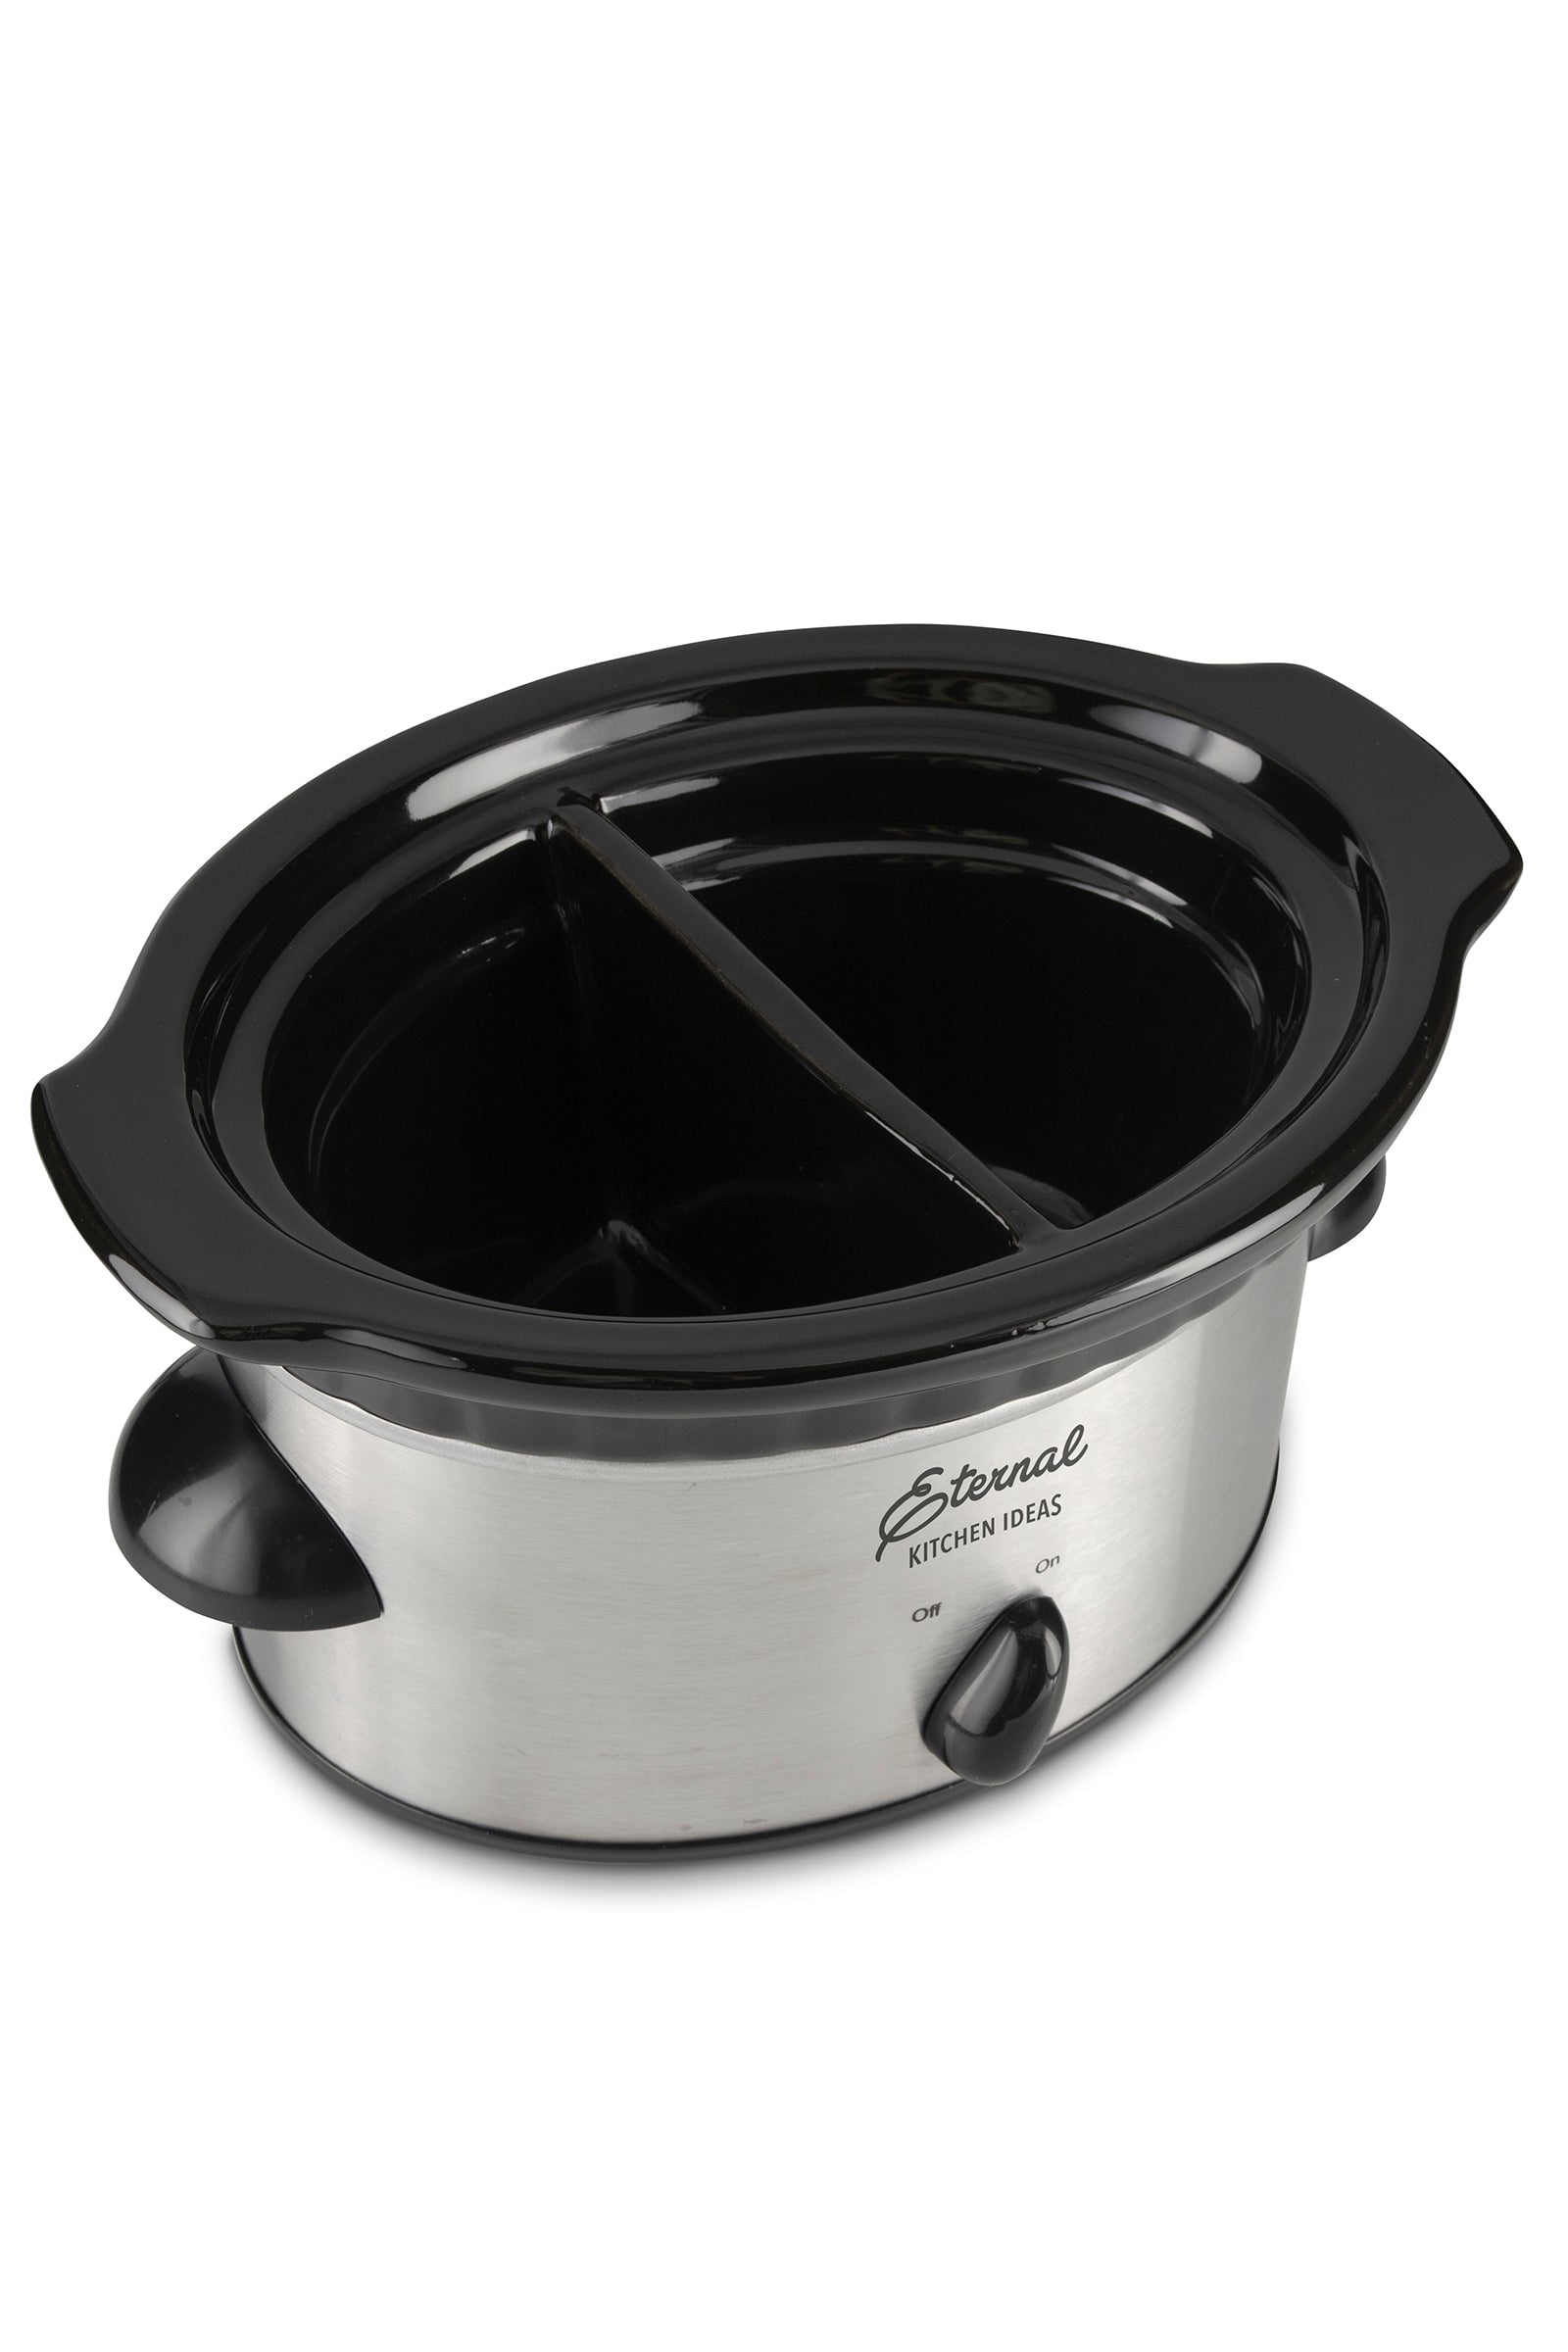 This Mini Crockpot Is 'the Best Portable Warming Crock for Dips